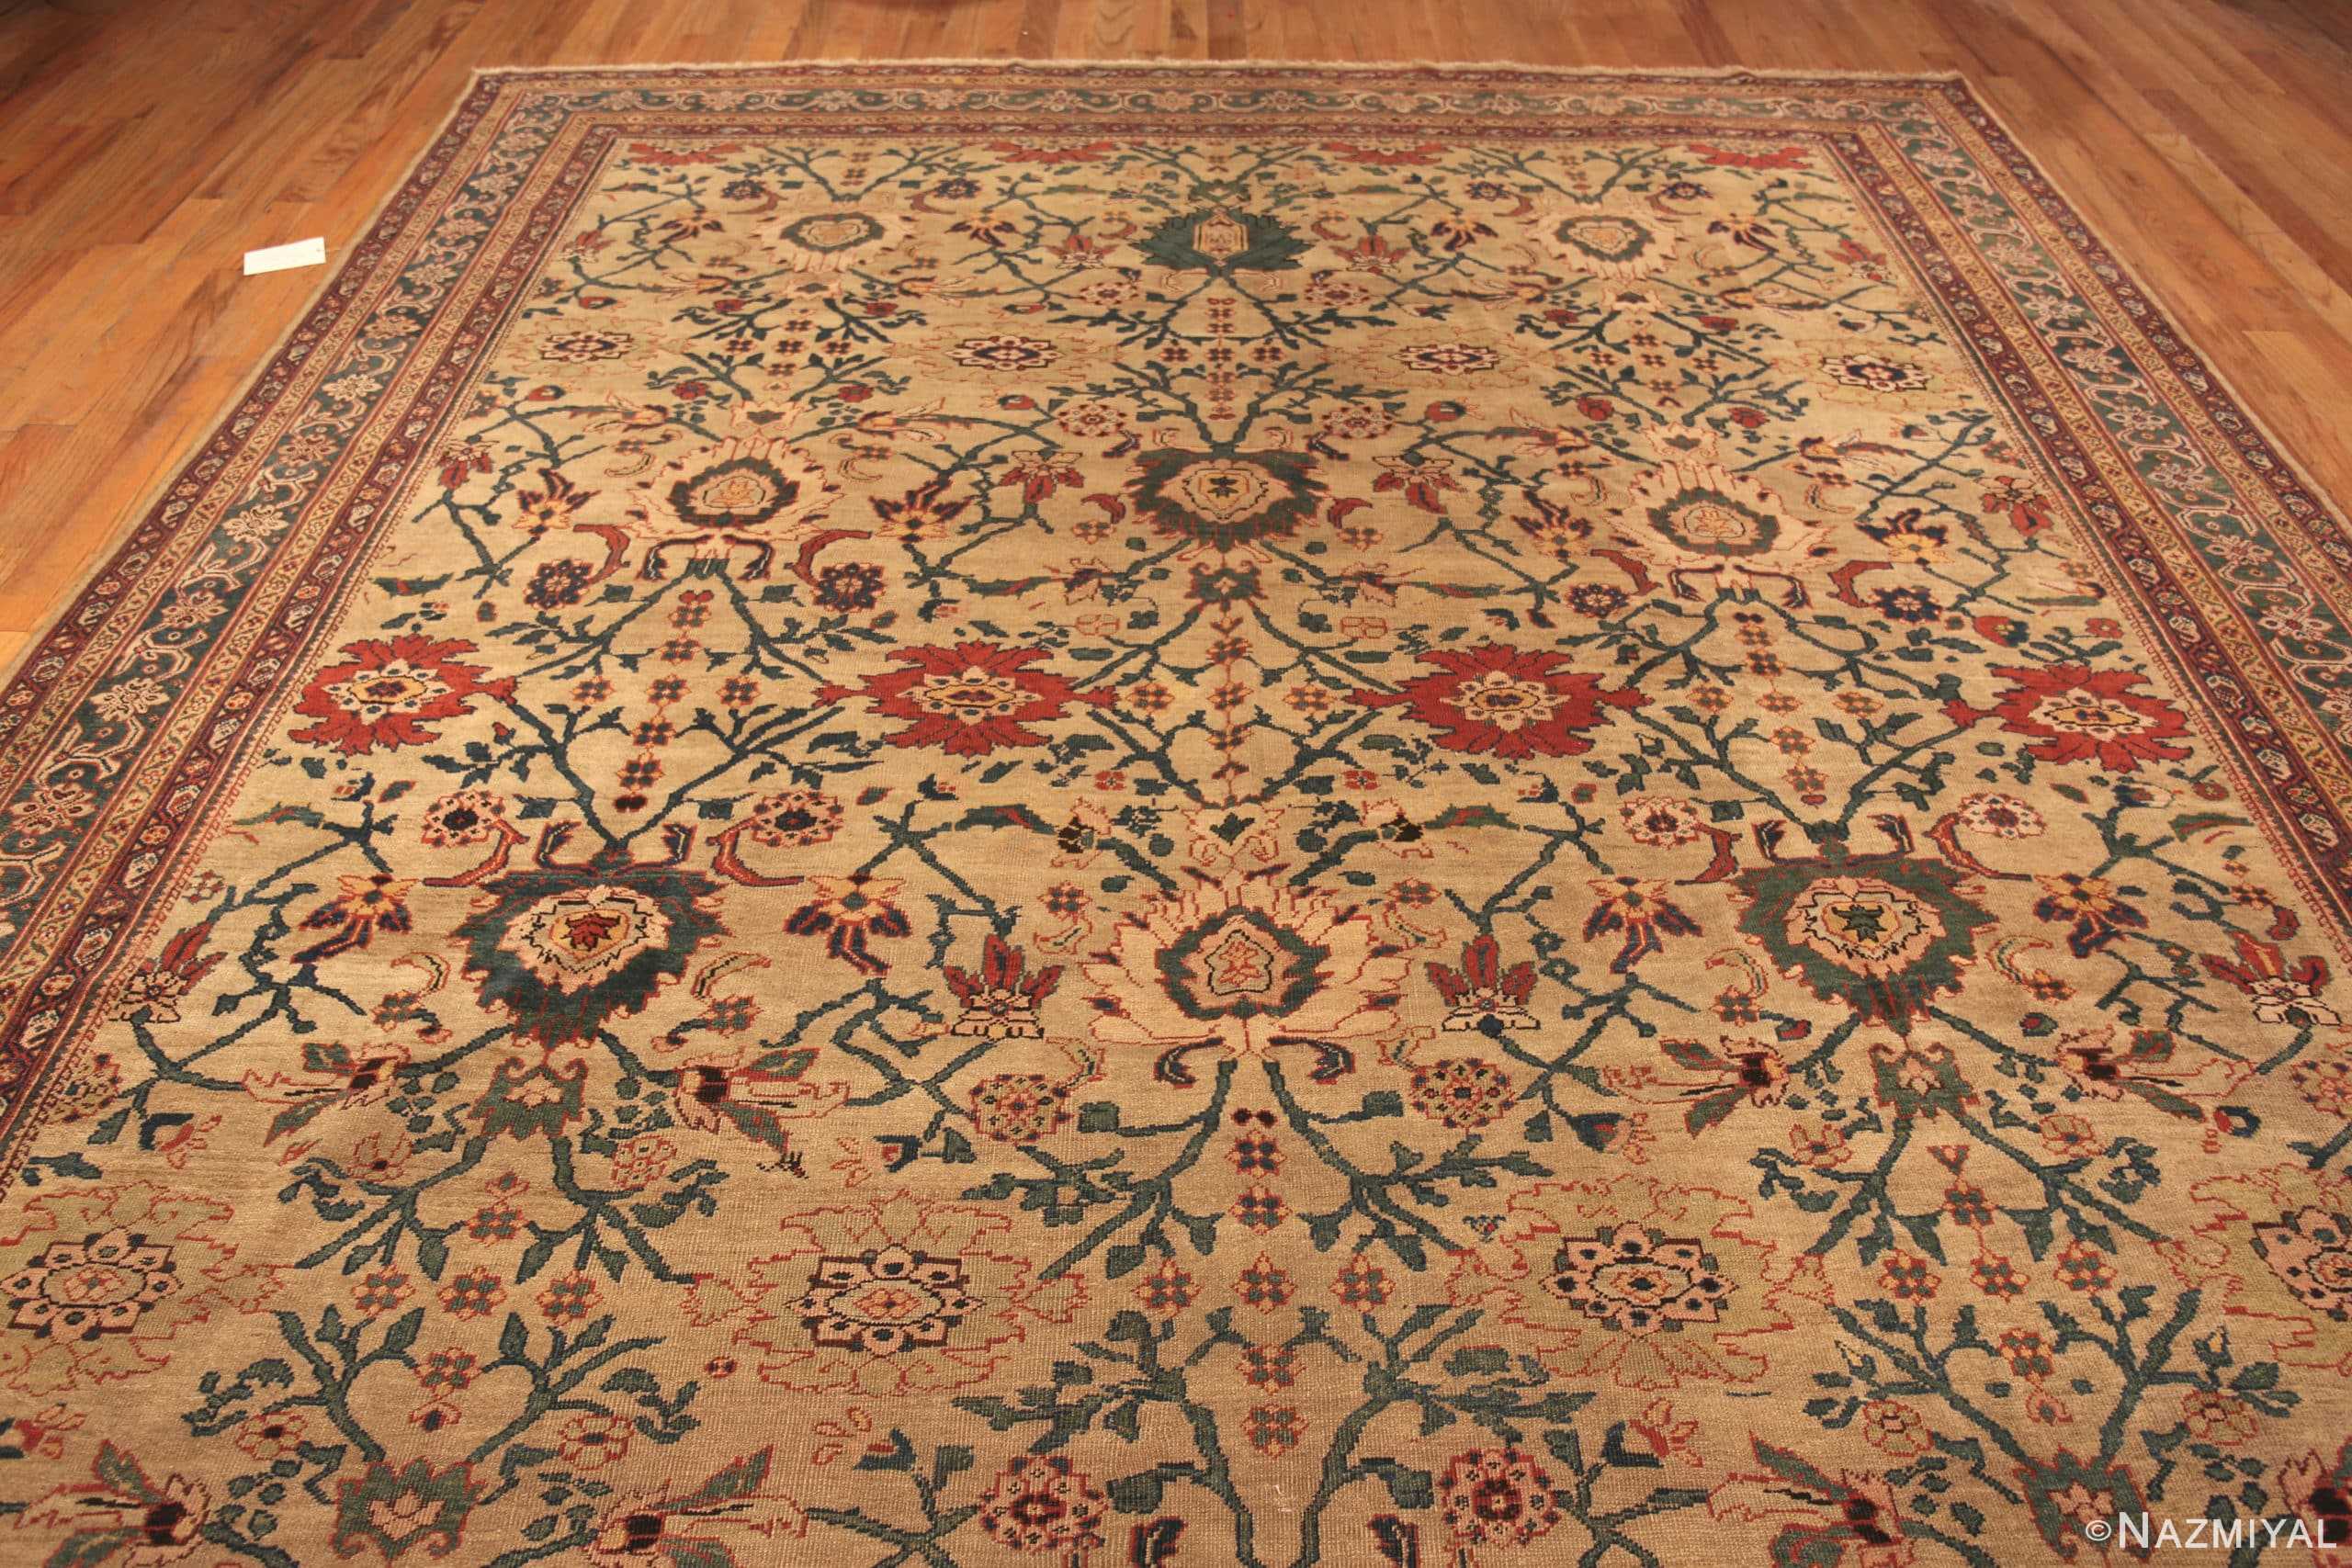 Whole View Of Large Antique Persian Sultanabad Area Rug 71756 by Nazmiyal Antique Rugs